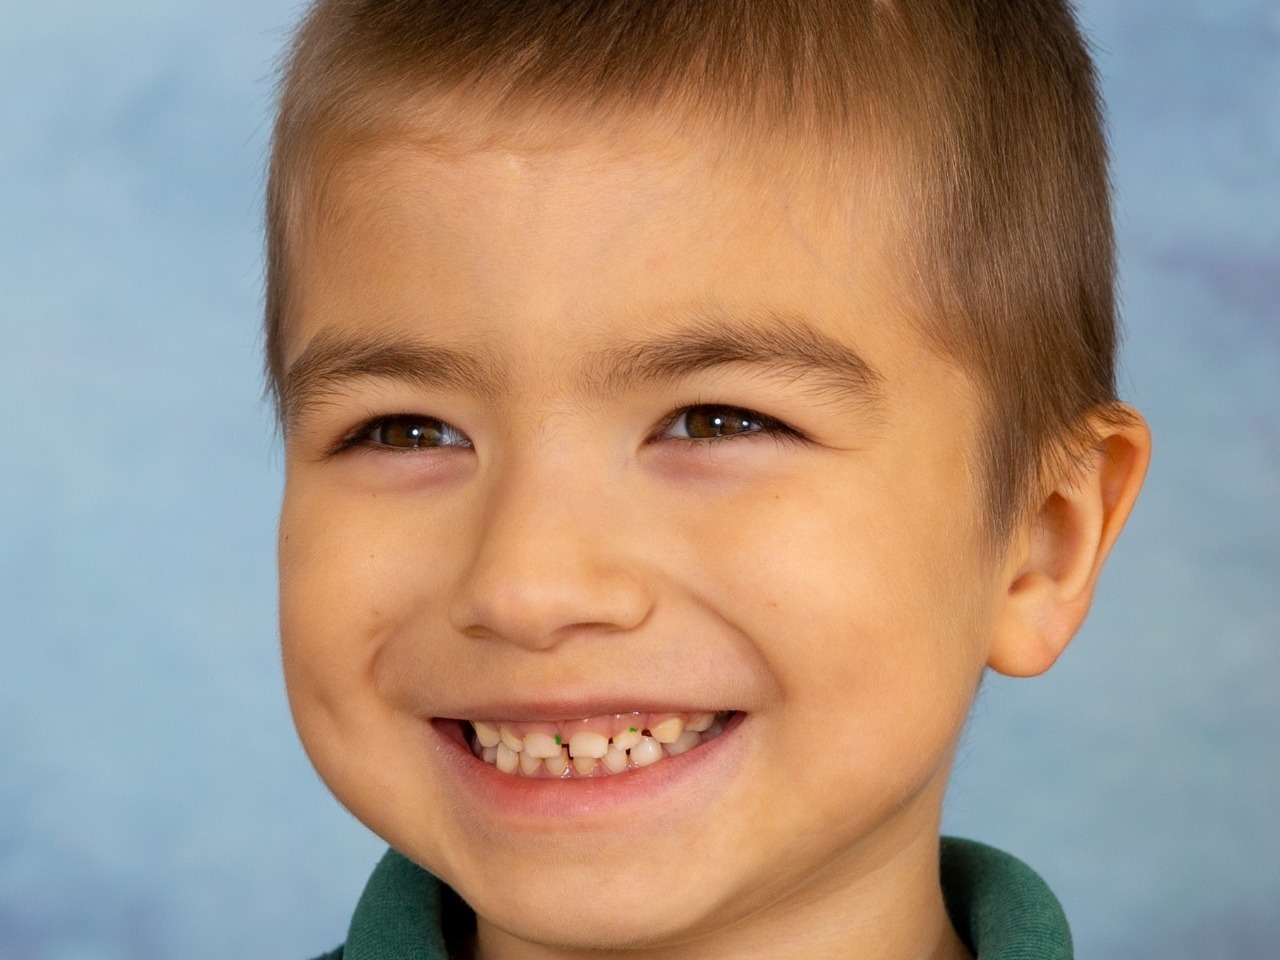 Cheeky little chappy with an amazing smile for his autism friendly school photograph session